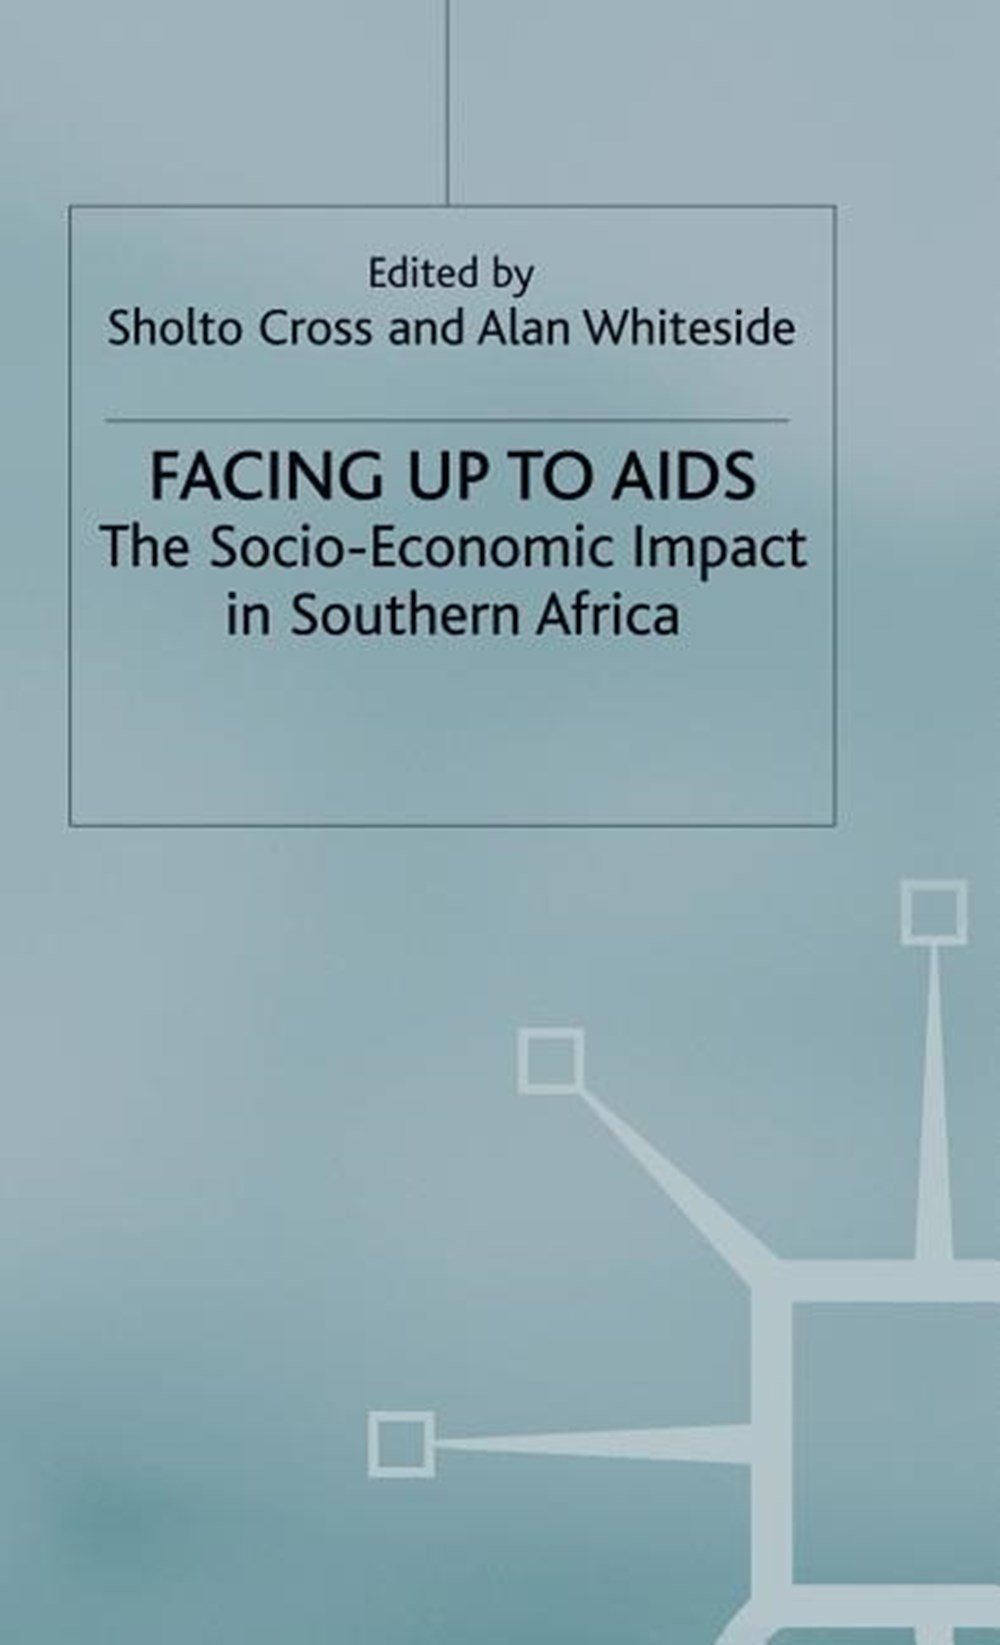 Facing Up to AIDS: The Socio-Economic Impact in Southern Africa (1996)